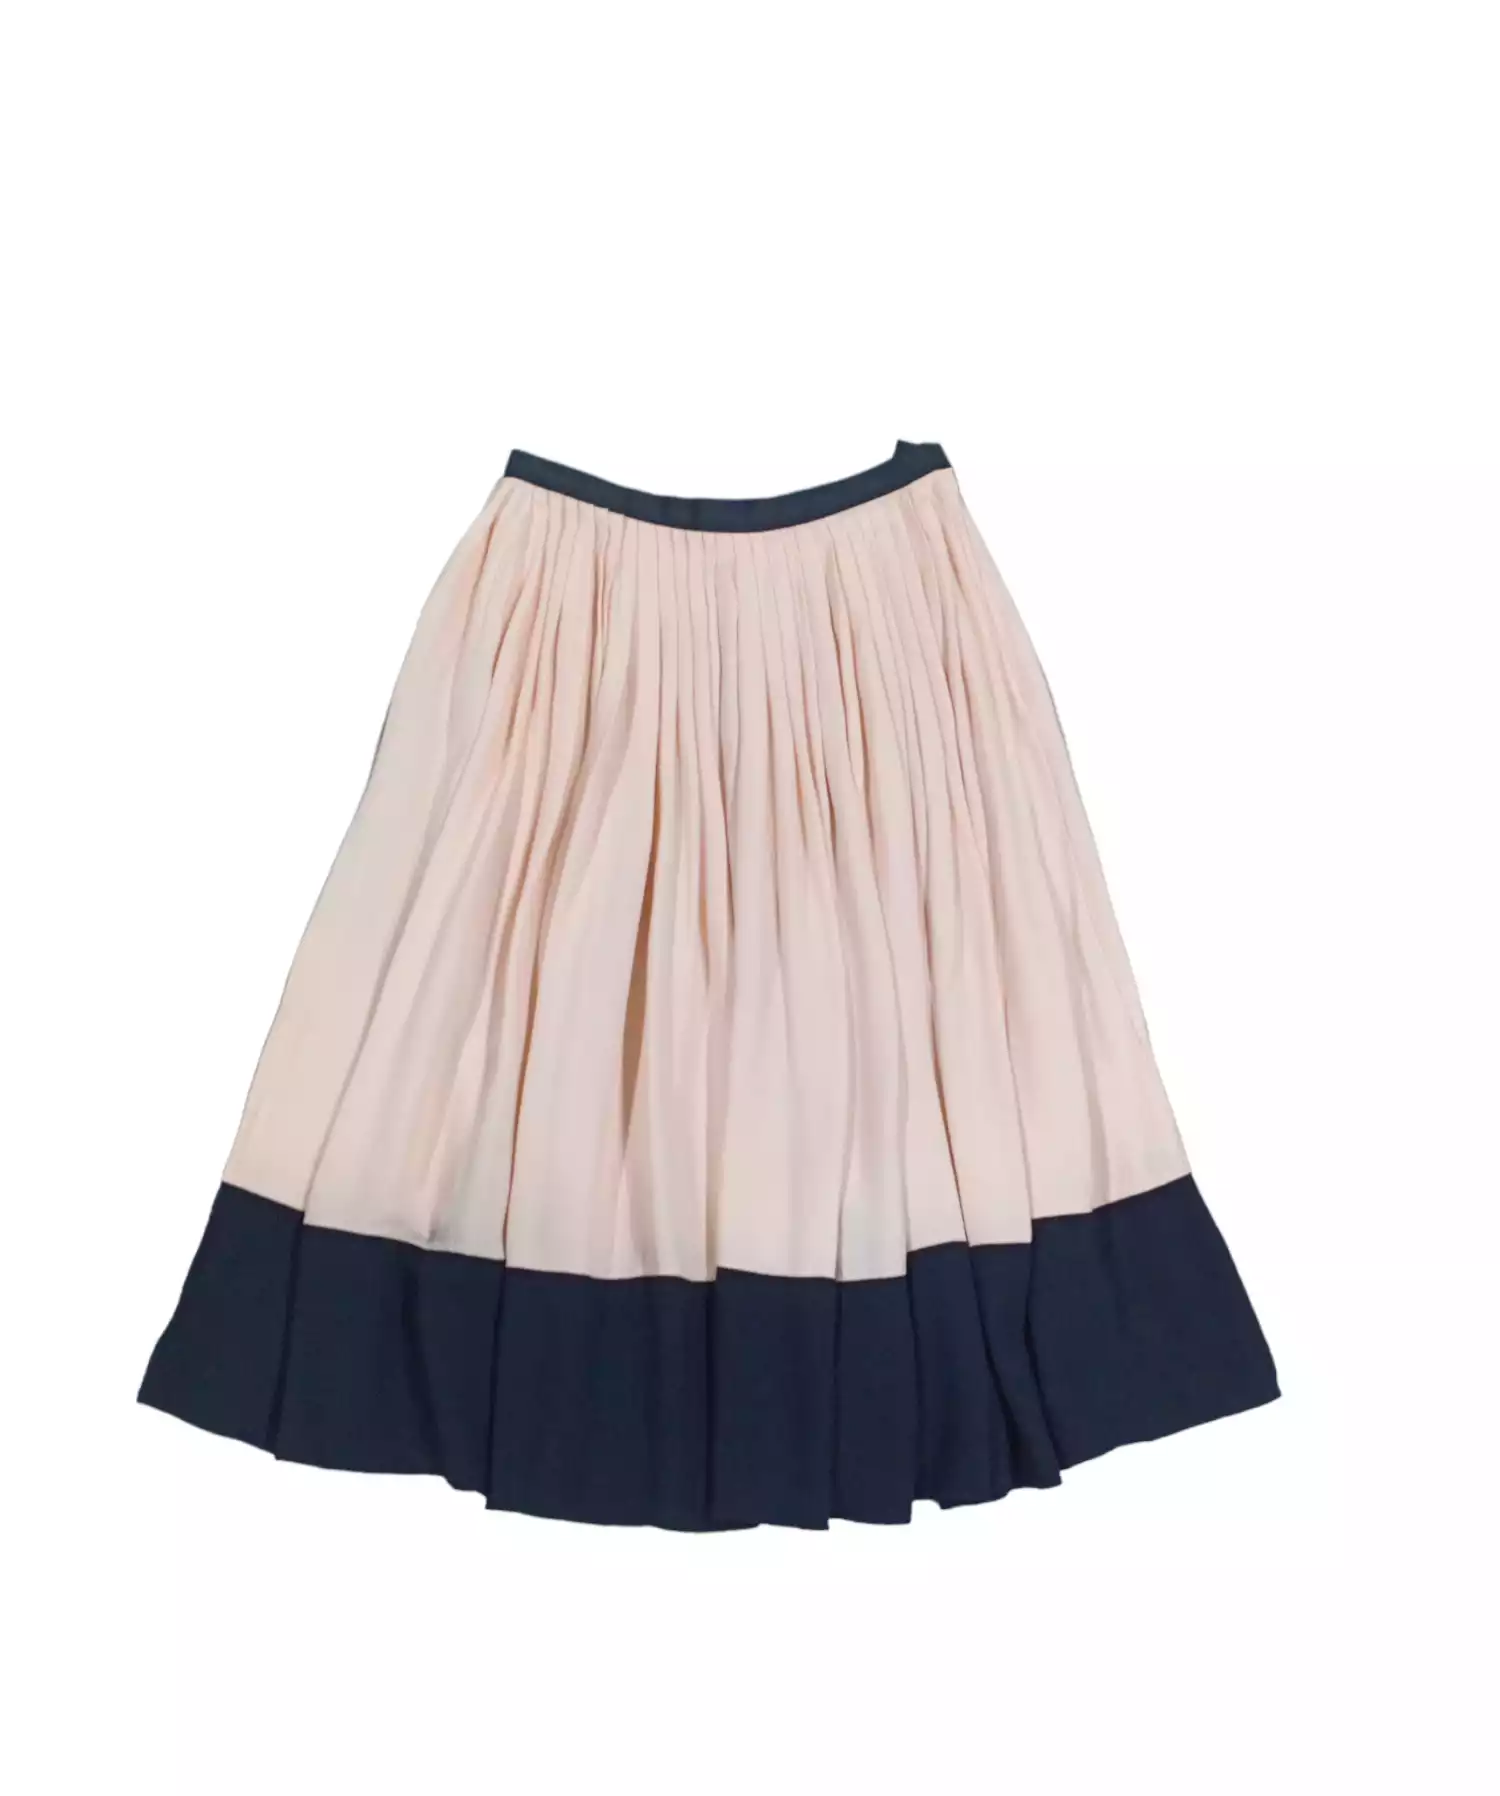 Skirt by kate Spade